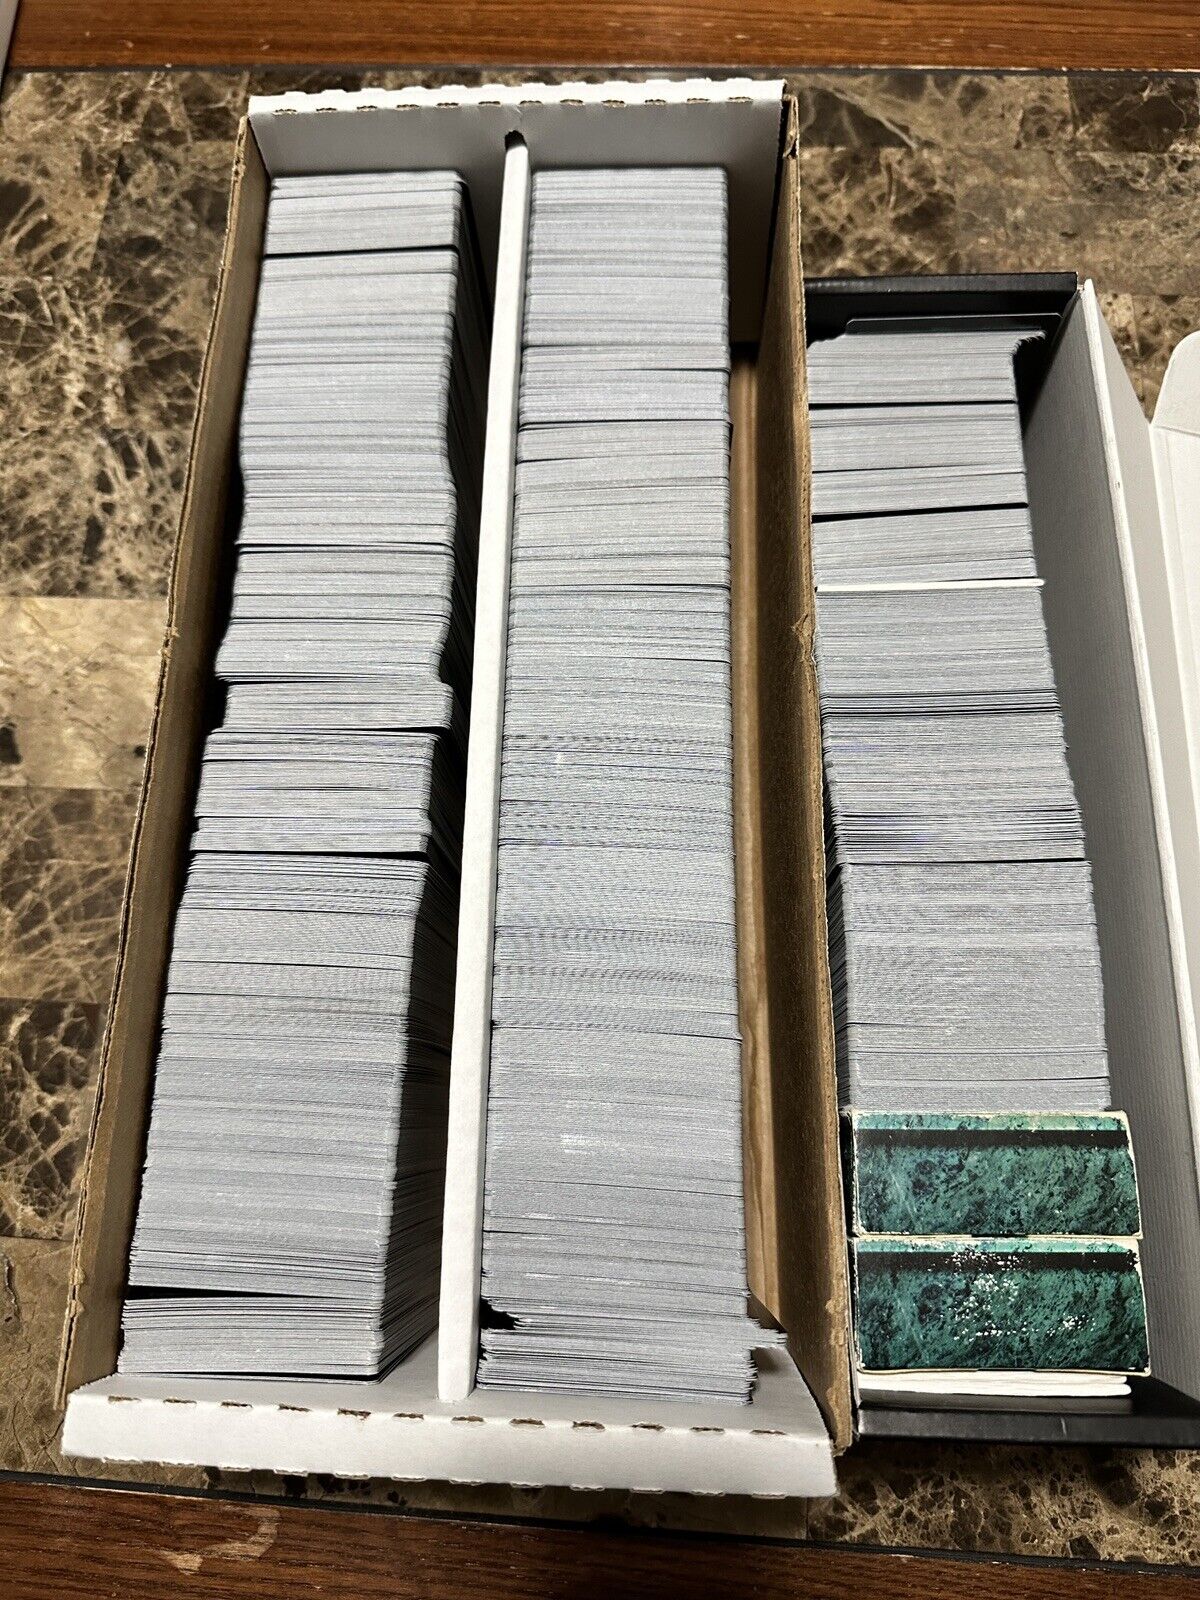 HUGE Lot - ~2,922 Jyhad Trading Collectible Cards - 1990s Rare Deckmaster